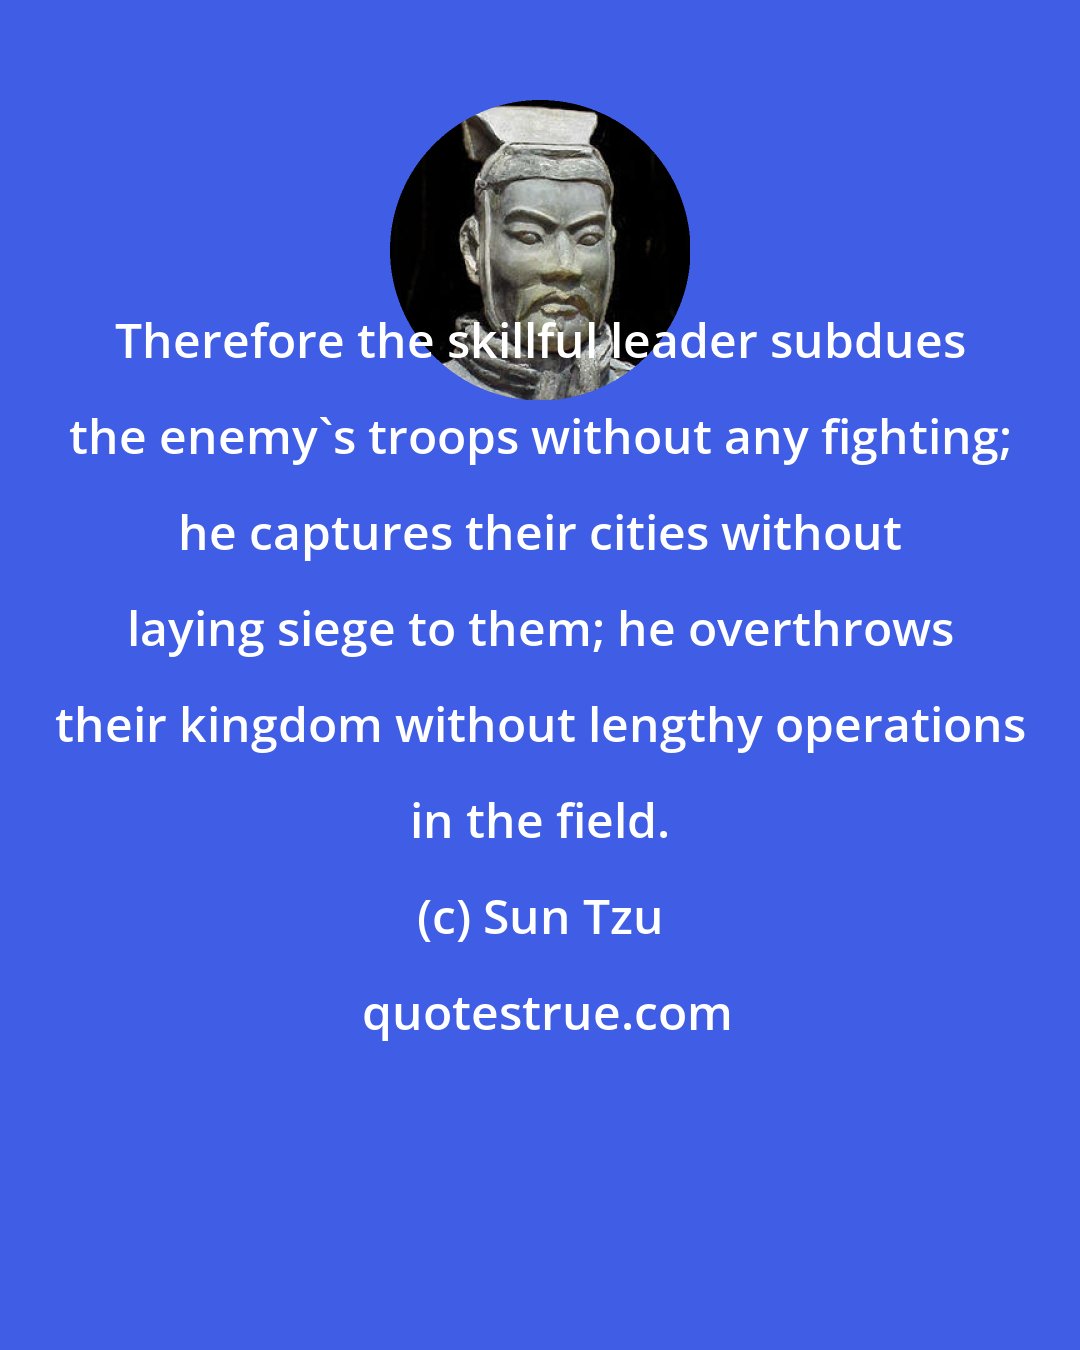 Sun Tzu: Therefore the skillful leader subdues the enemy's troops without any fighting; he captures their cities without laying siege to them; he overthrows their kingdom without lengthy operations in the field.